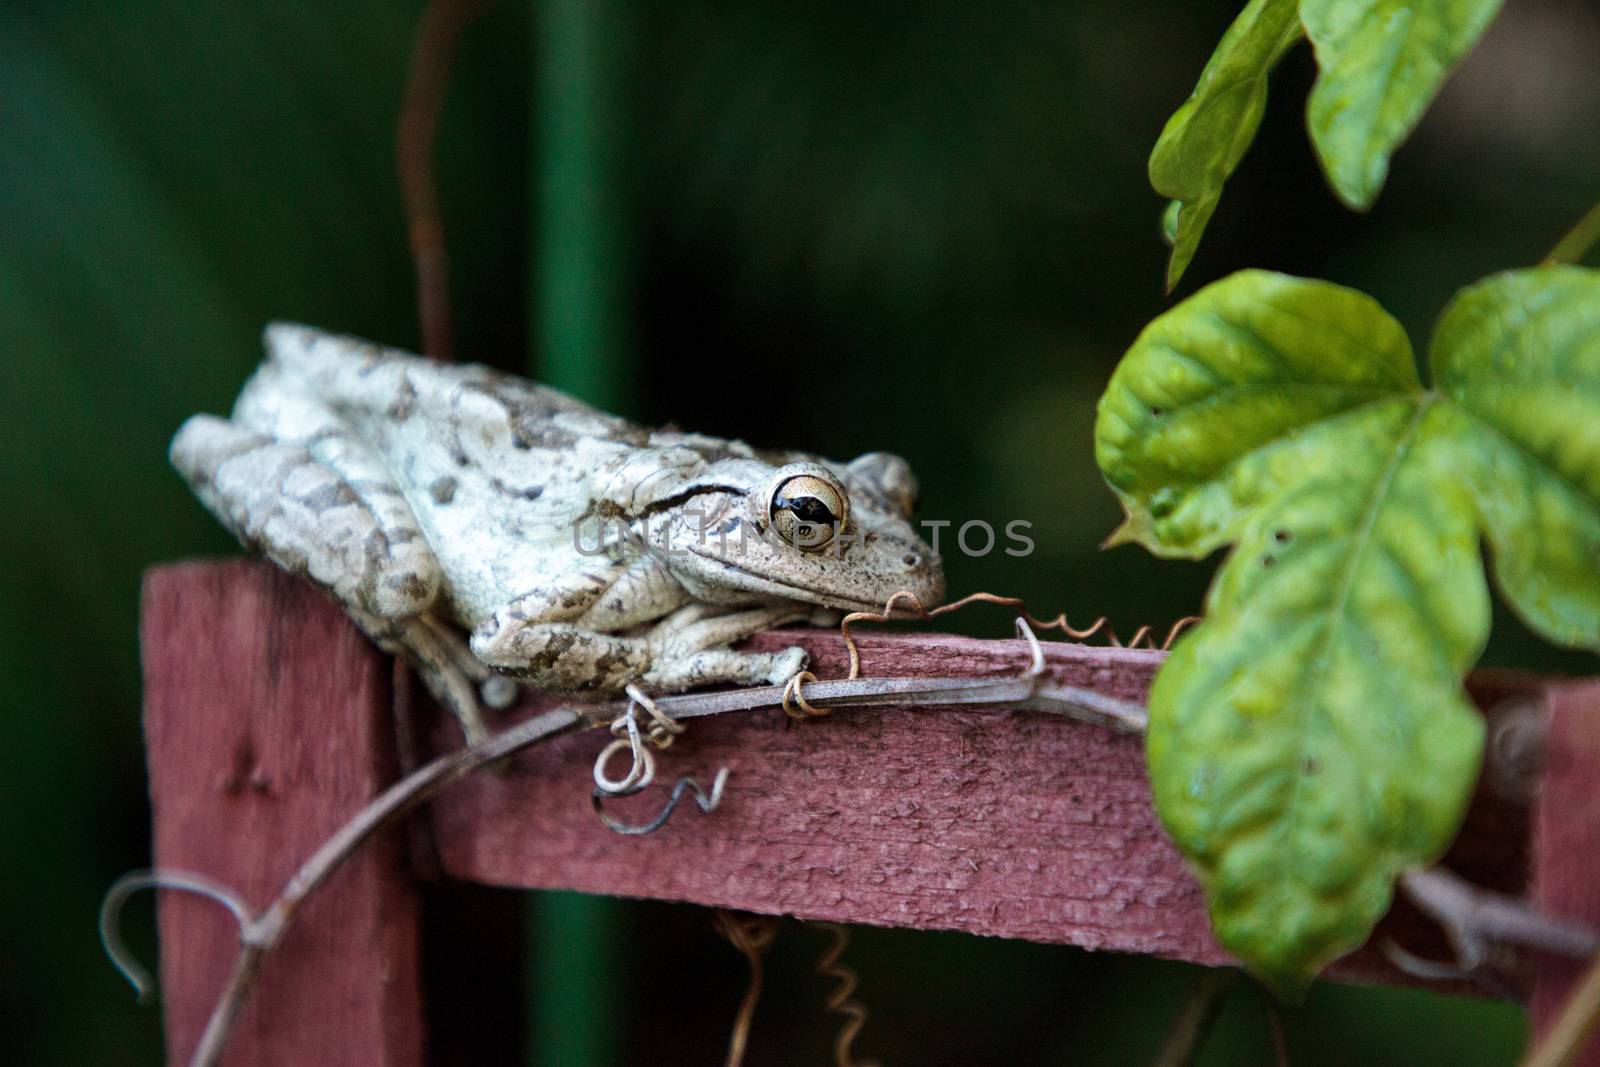 Cuban Tree Frog Osteopilus septentrionalis perches on a vine trellis in tropical Florida.